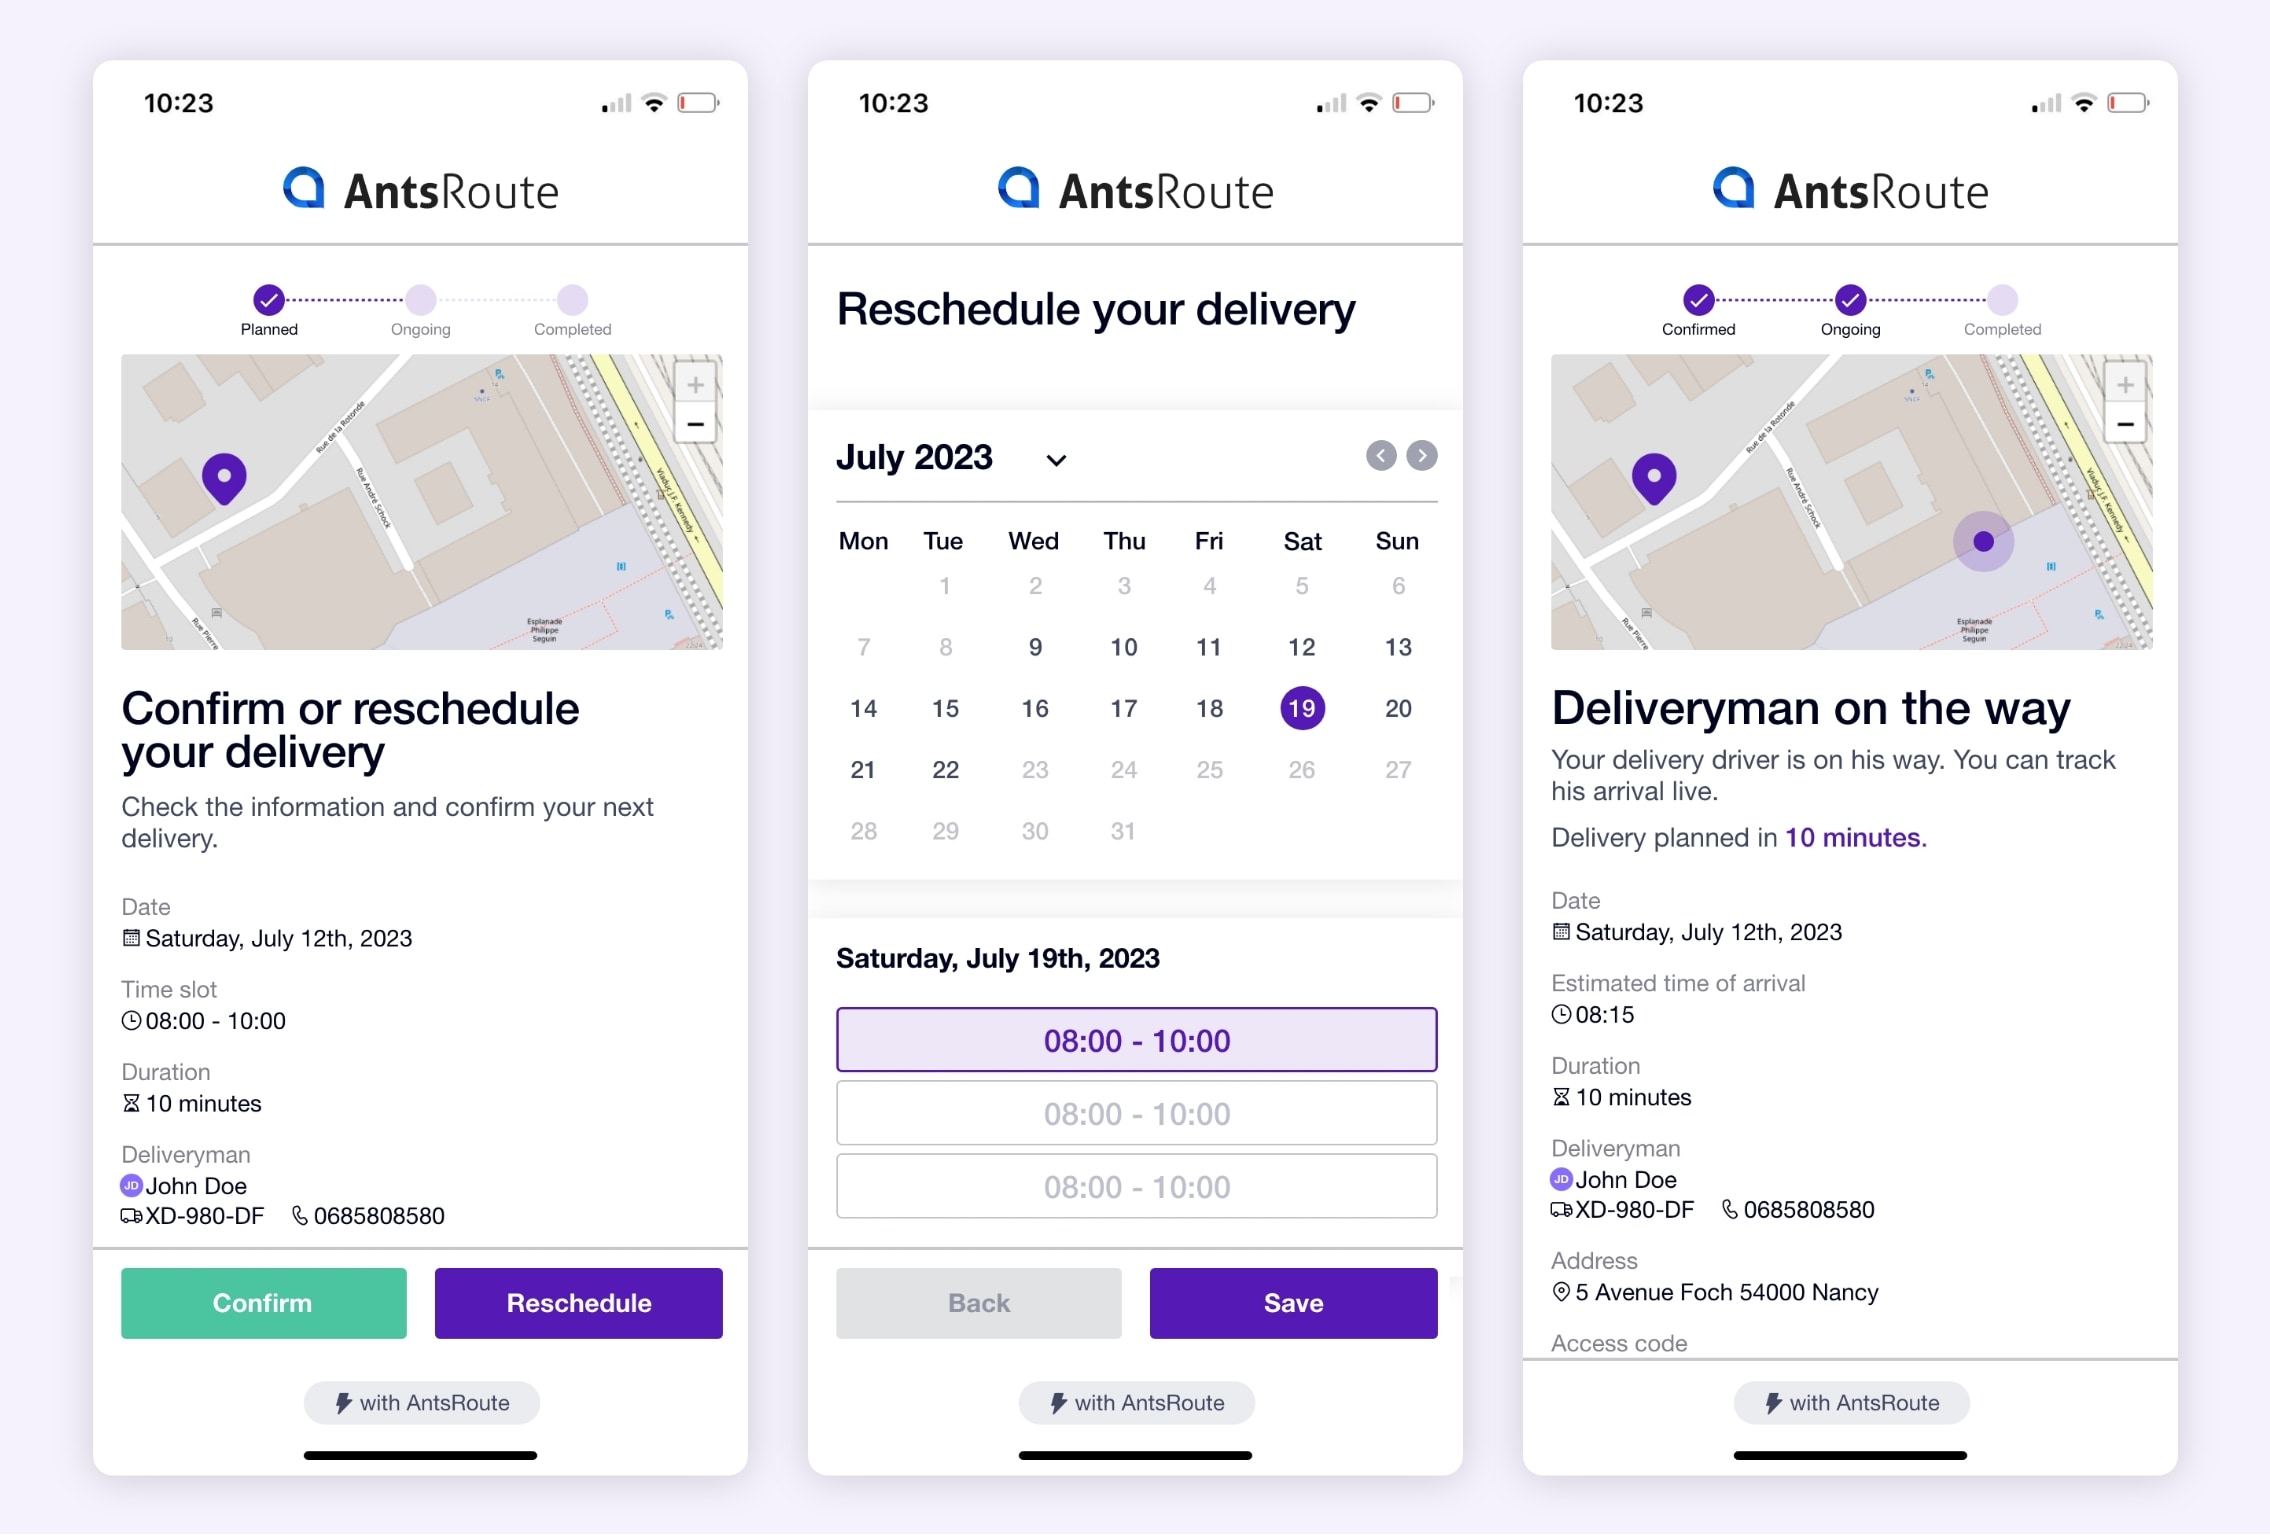 A link for rescheduling a delivery and tracking a delivery driver.